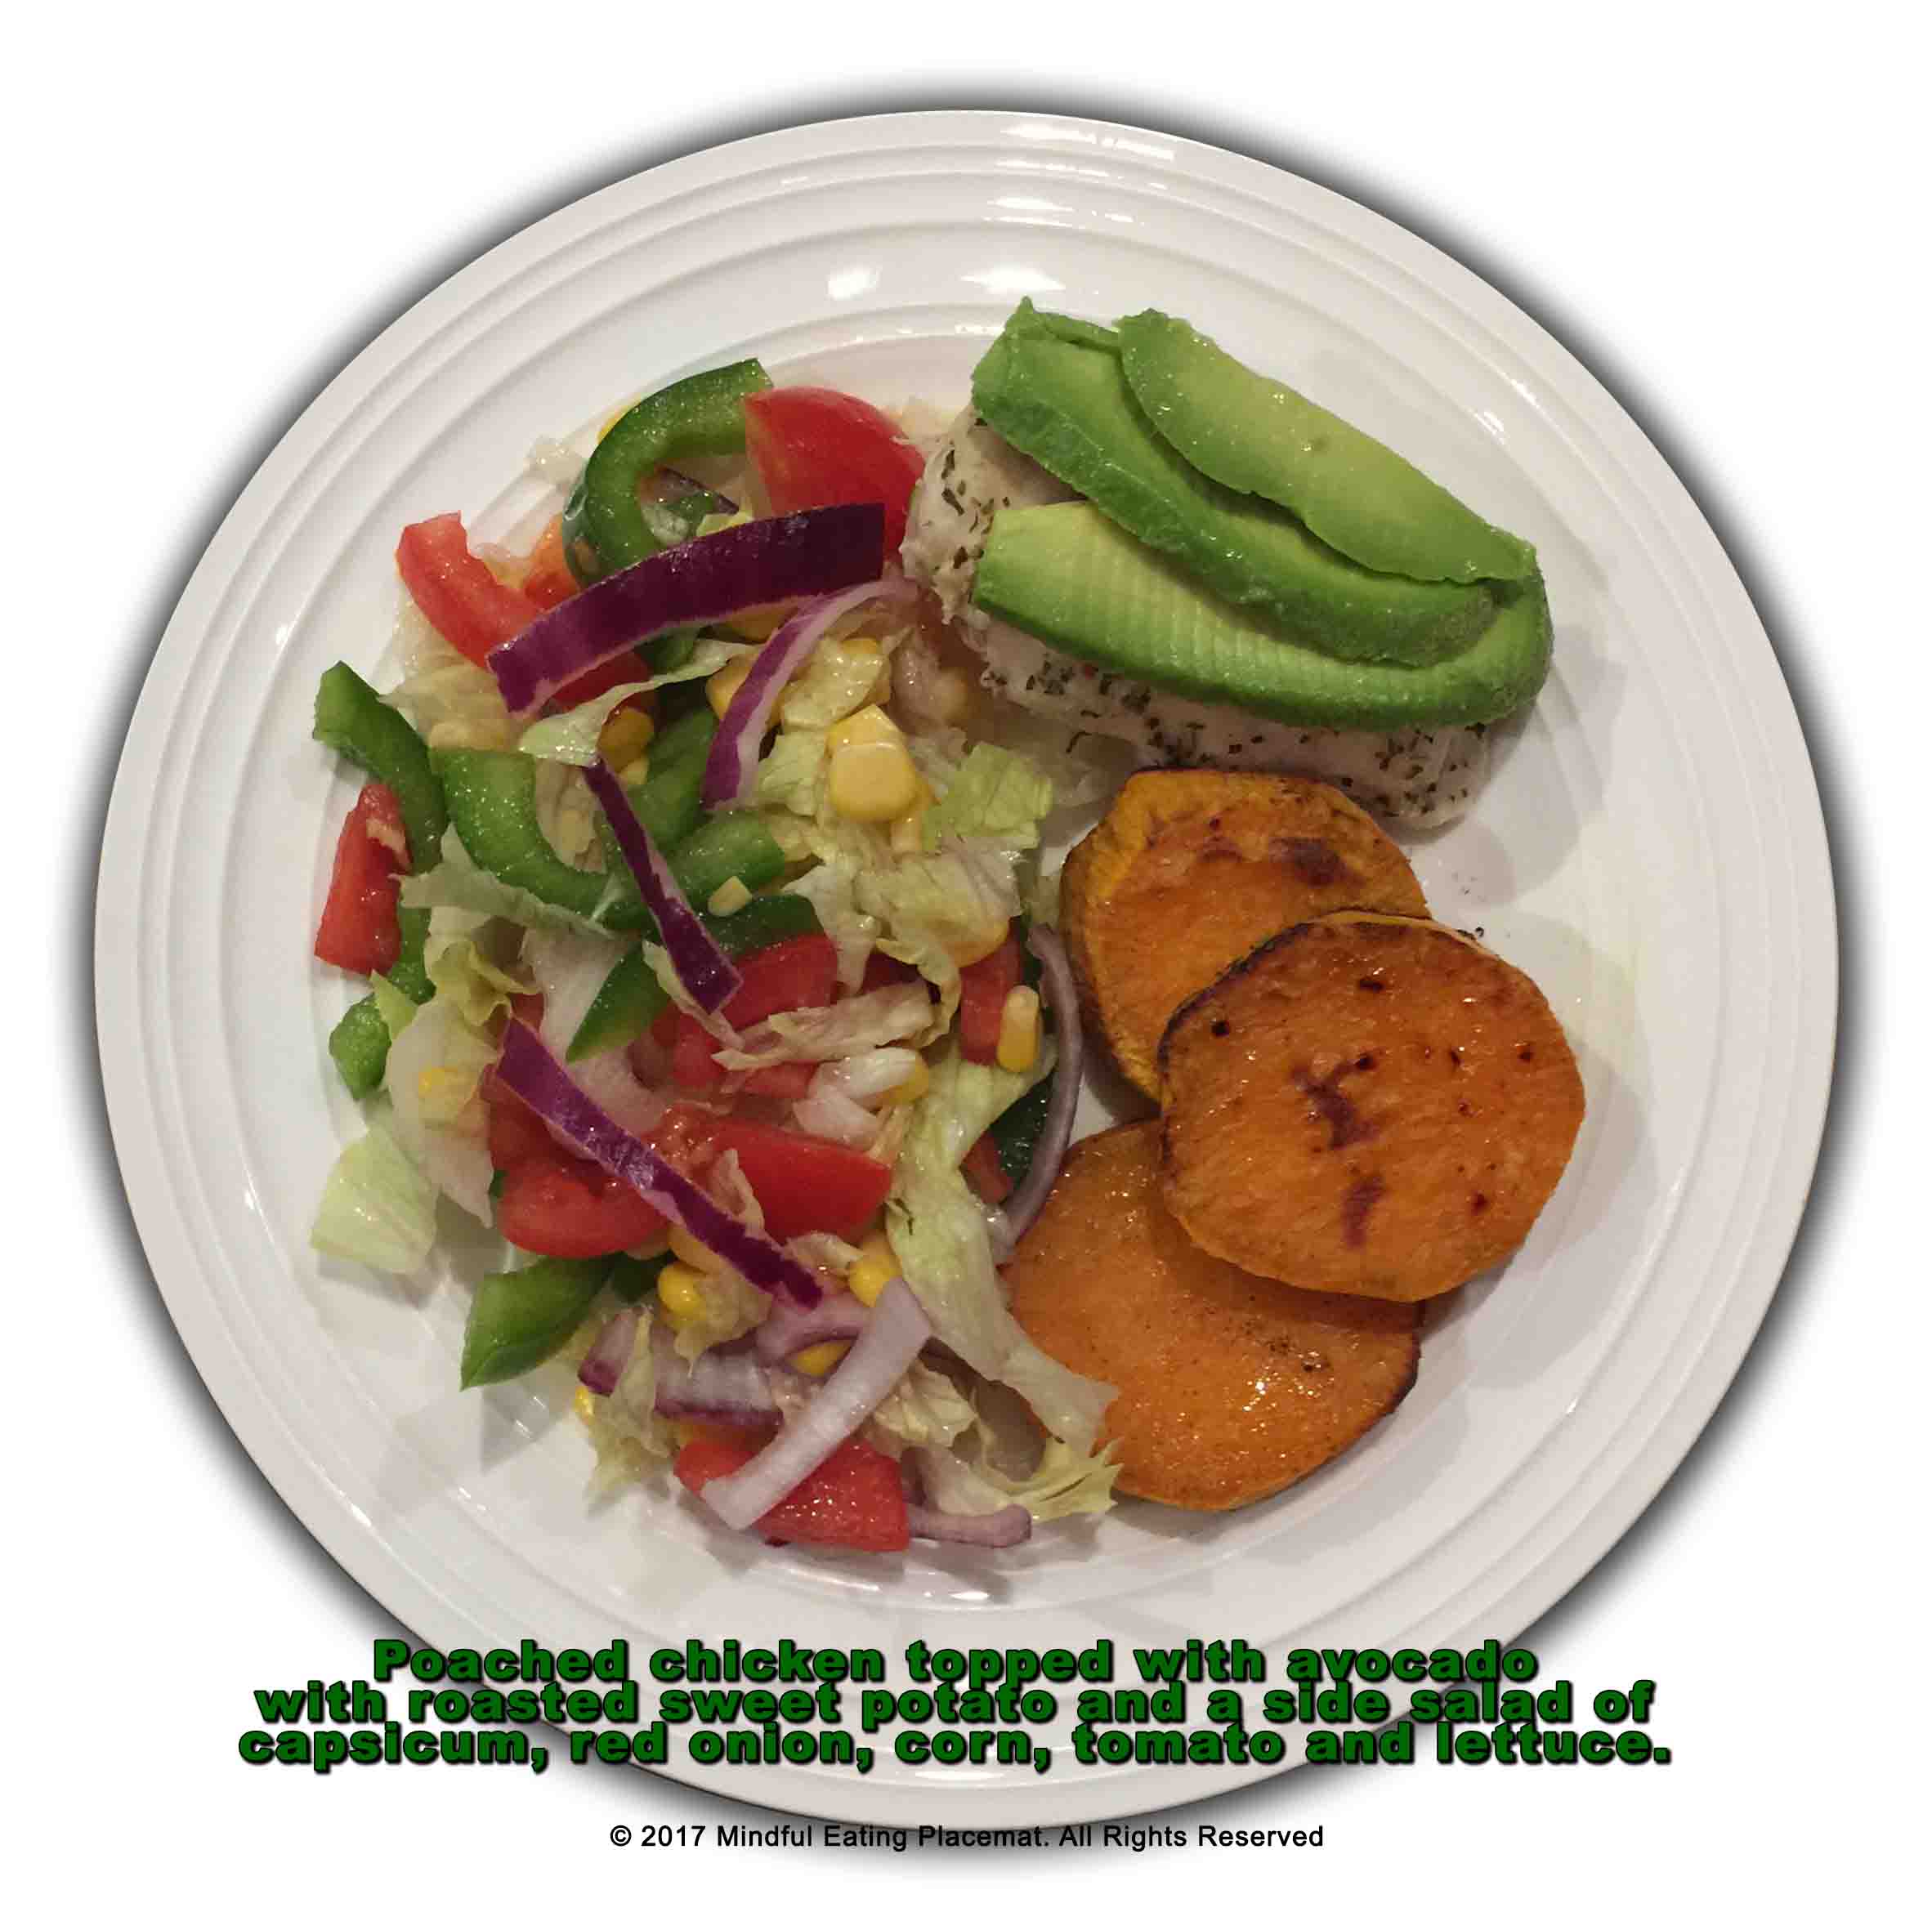 Poached chicken with avocado, sweet potato and salad